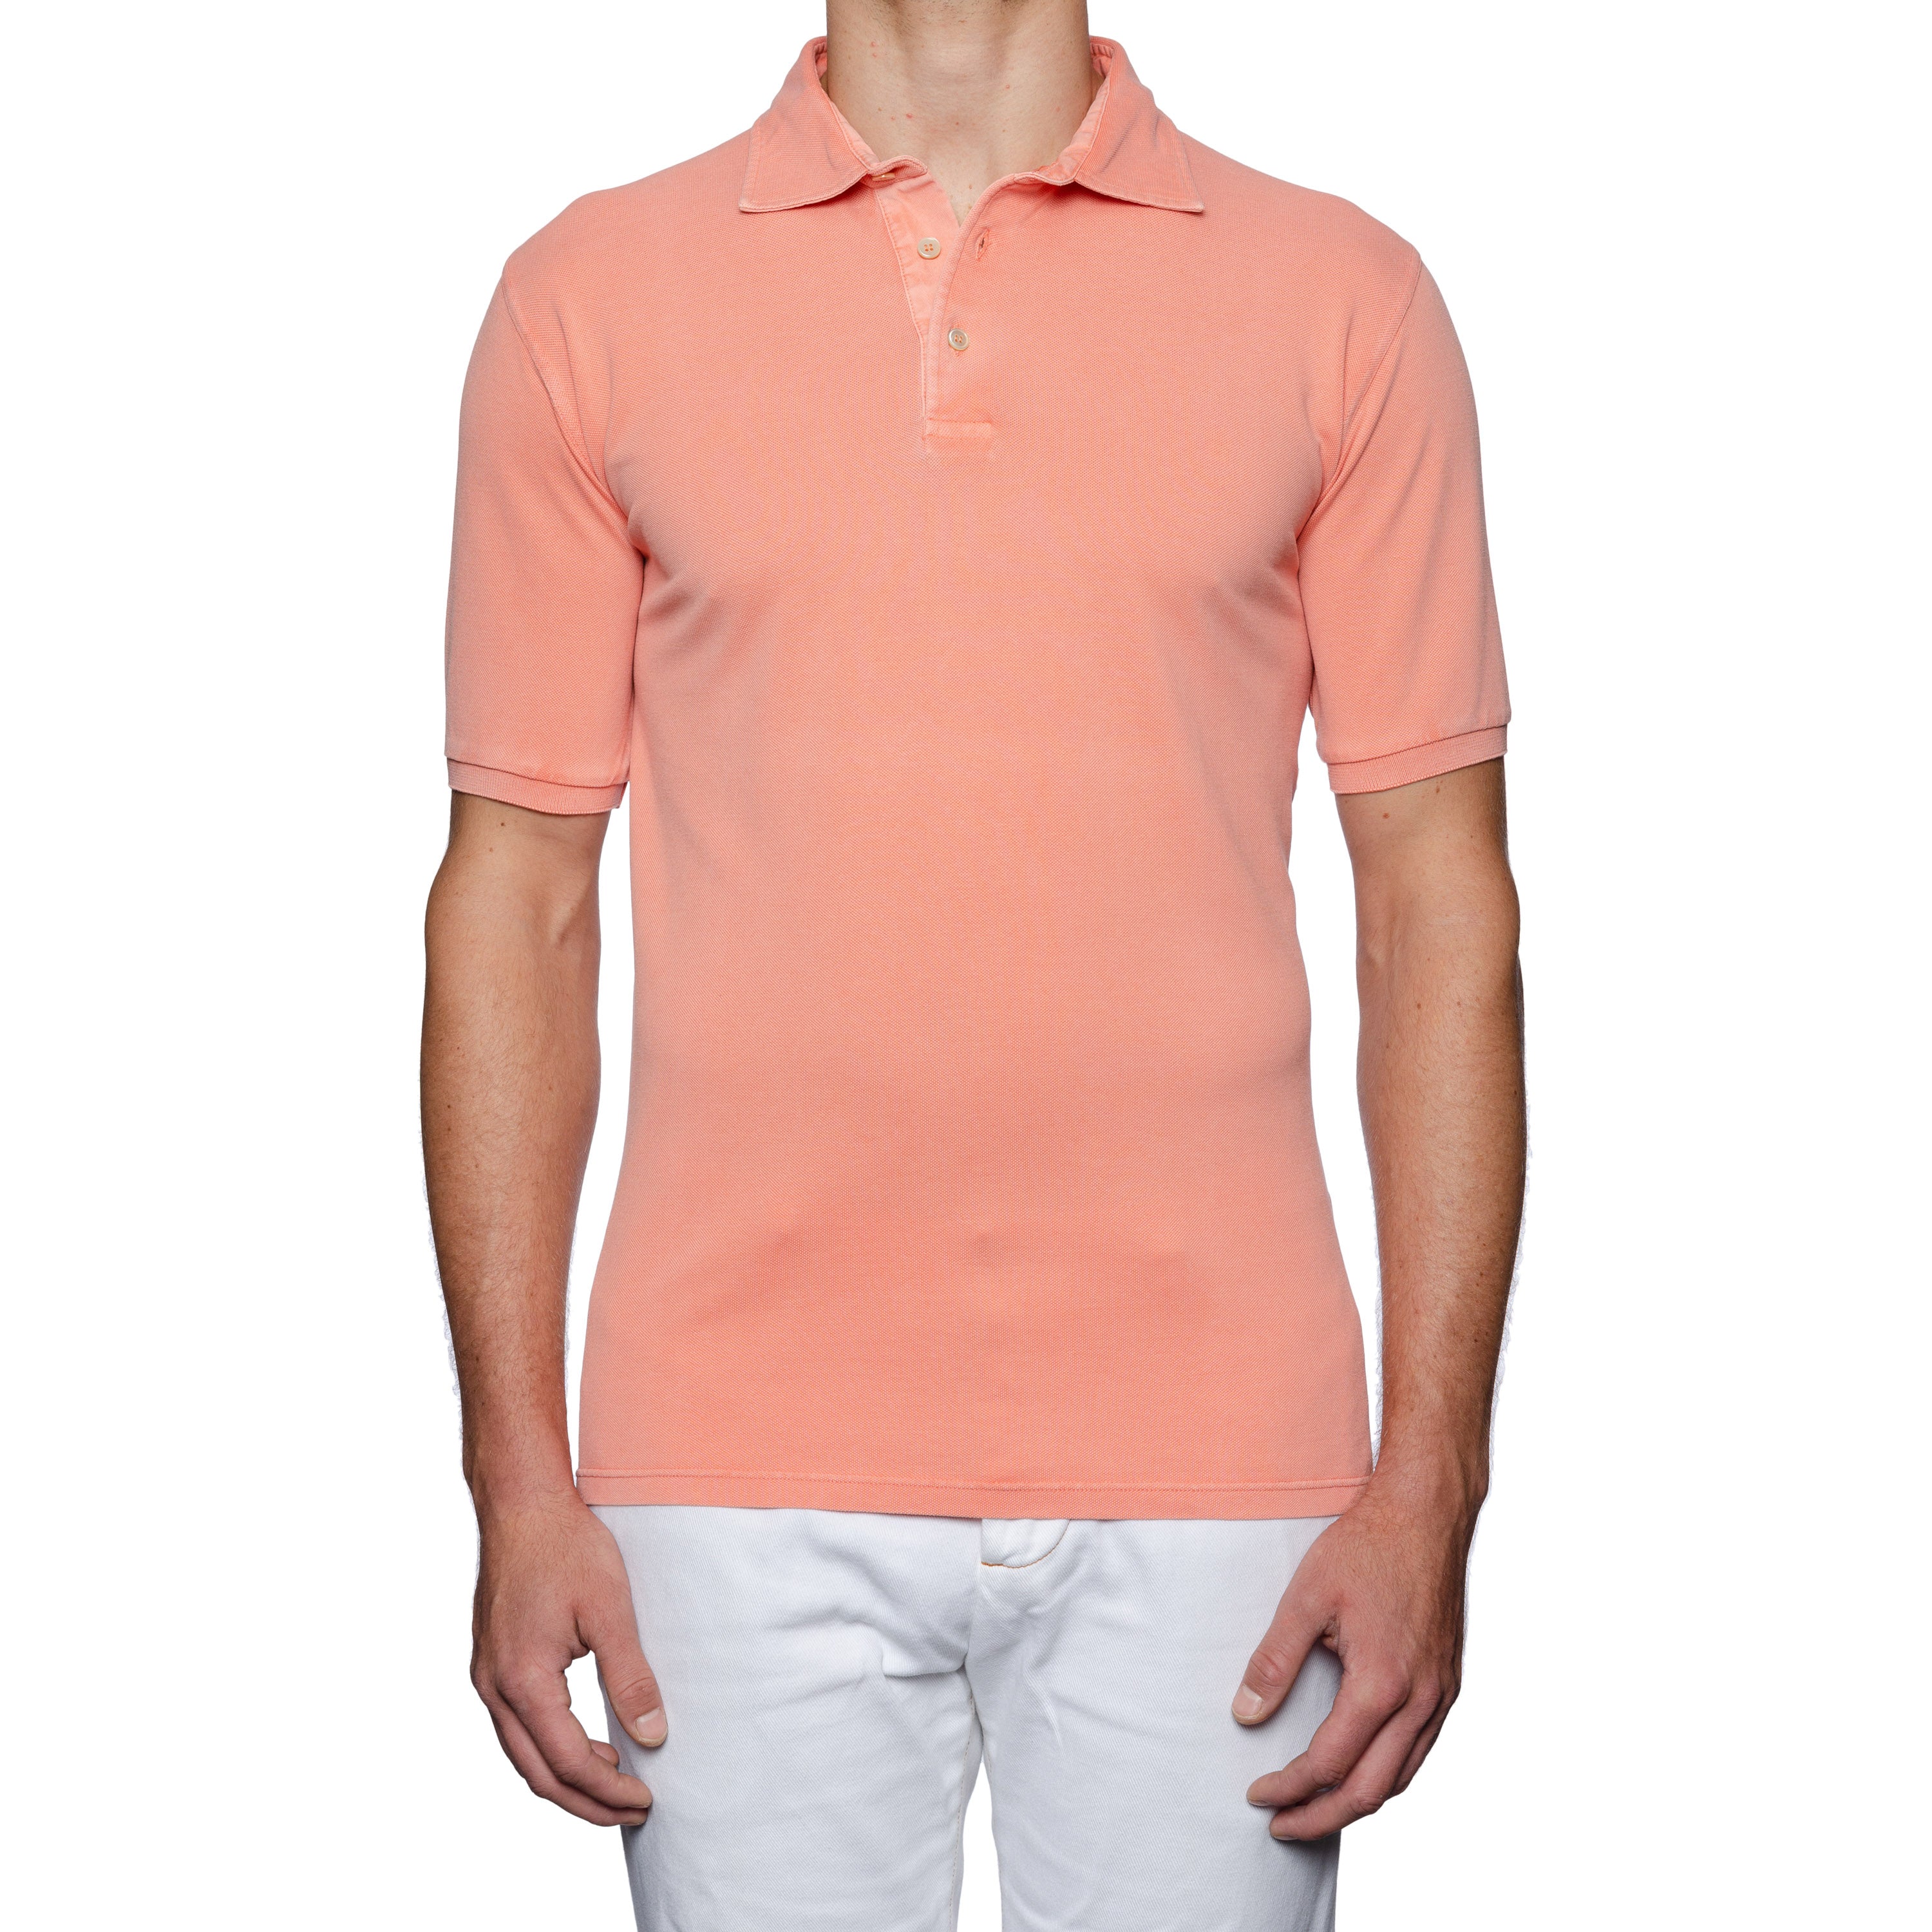 FEDELI "North" Salmon Cotton Pique Frosted Polo Shirt EU 56 NEW US 2XL Slim Fit FEDELI